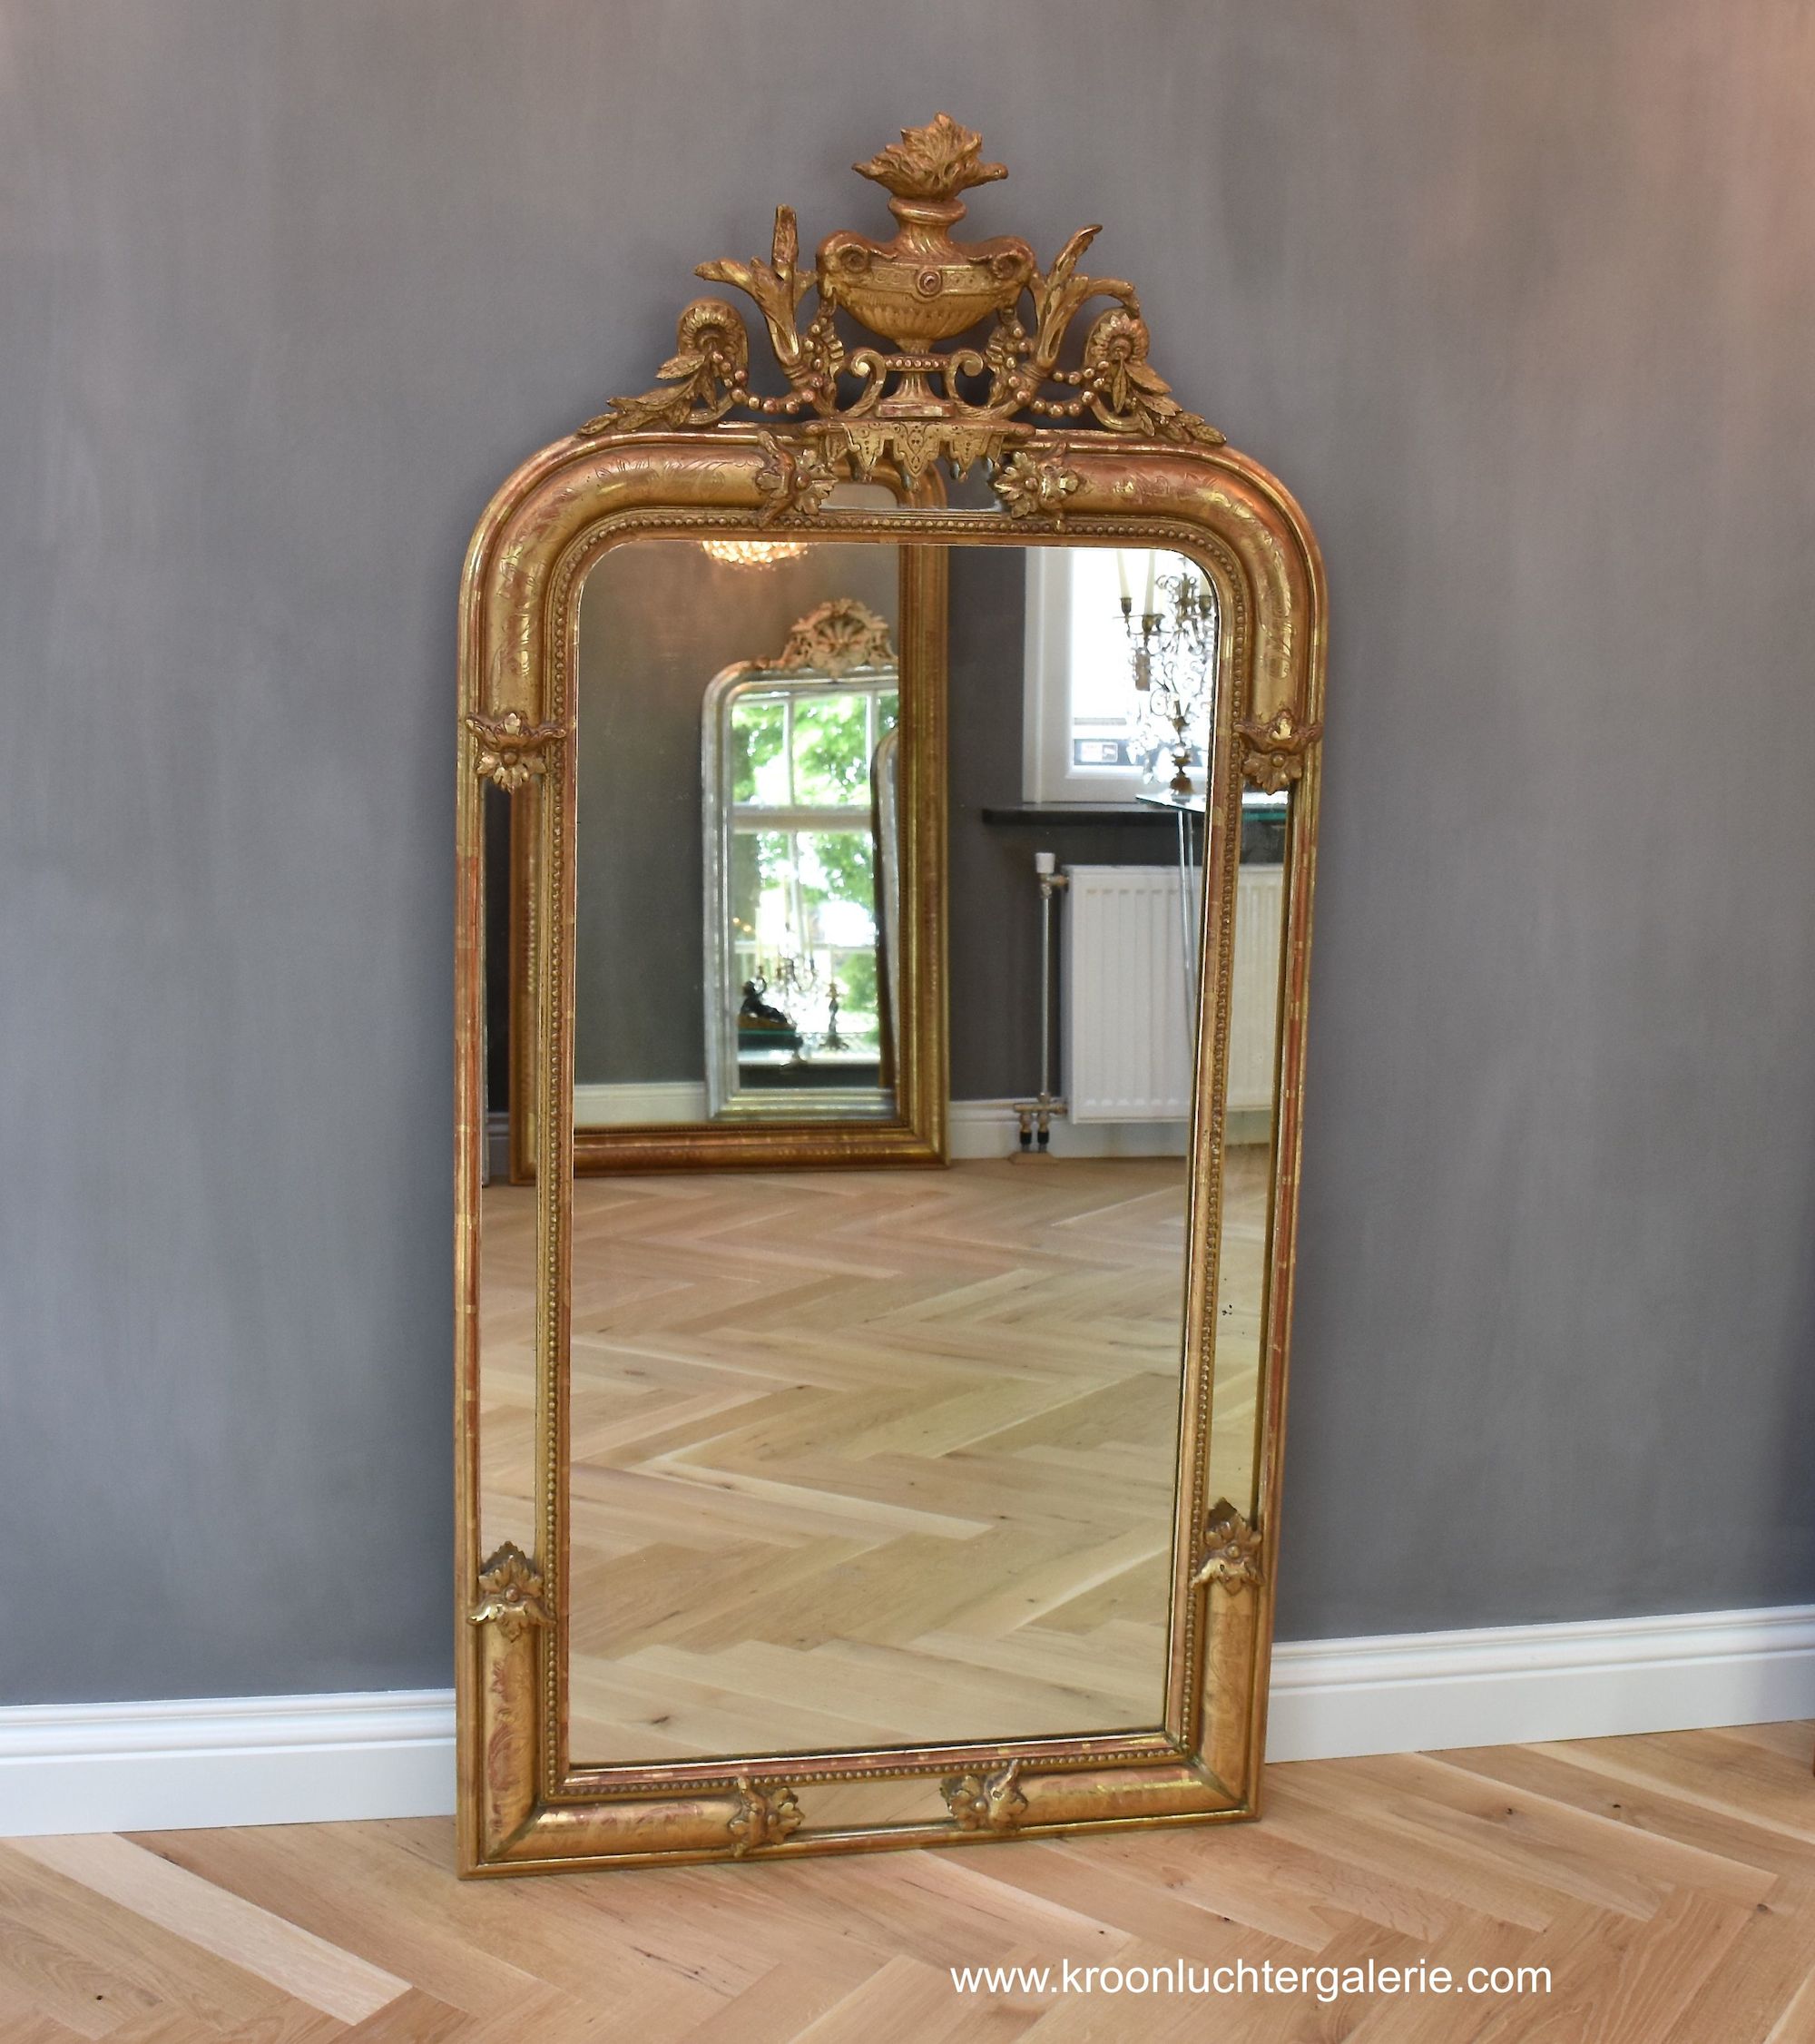 19th c.French gold-leaf mirror with a crown